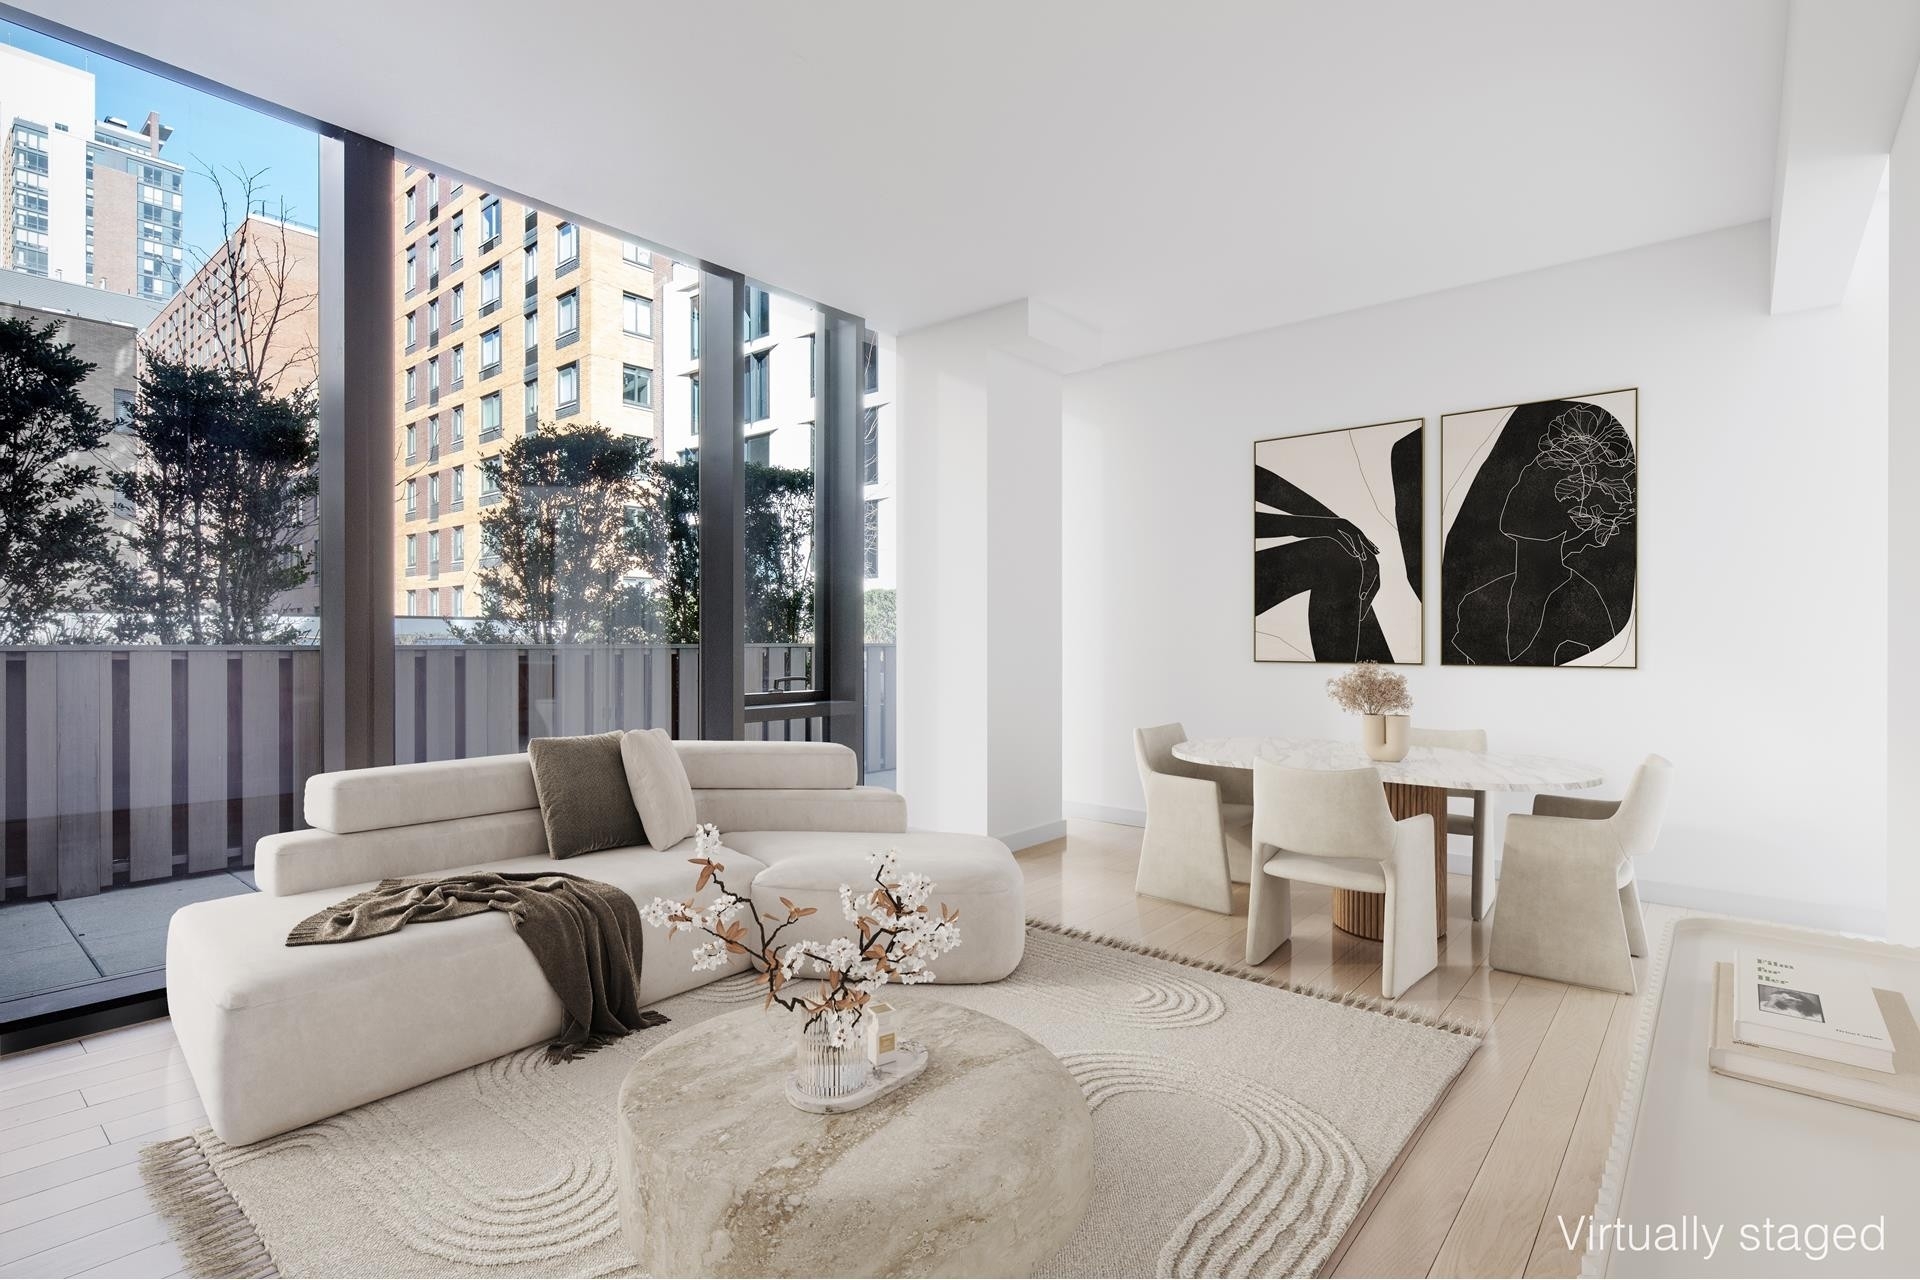 Property at Bloom 45, 500 W 45TH ST, 229 Hell's Kitchen, New York, NY 10036